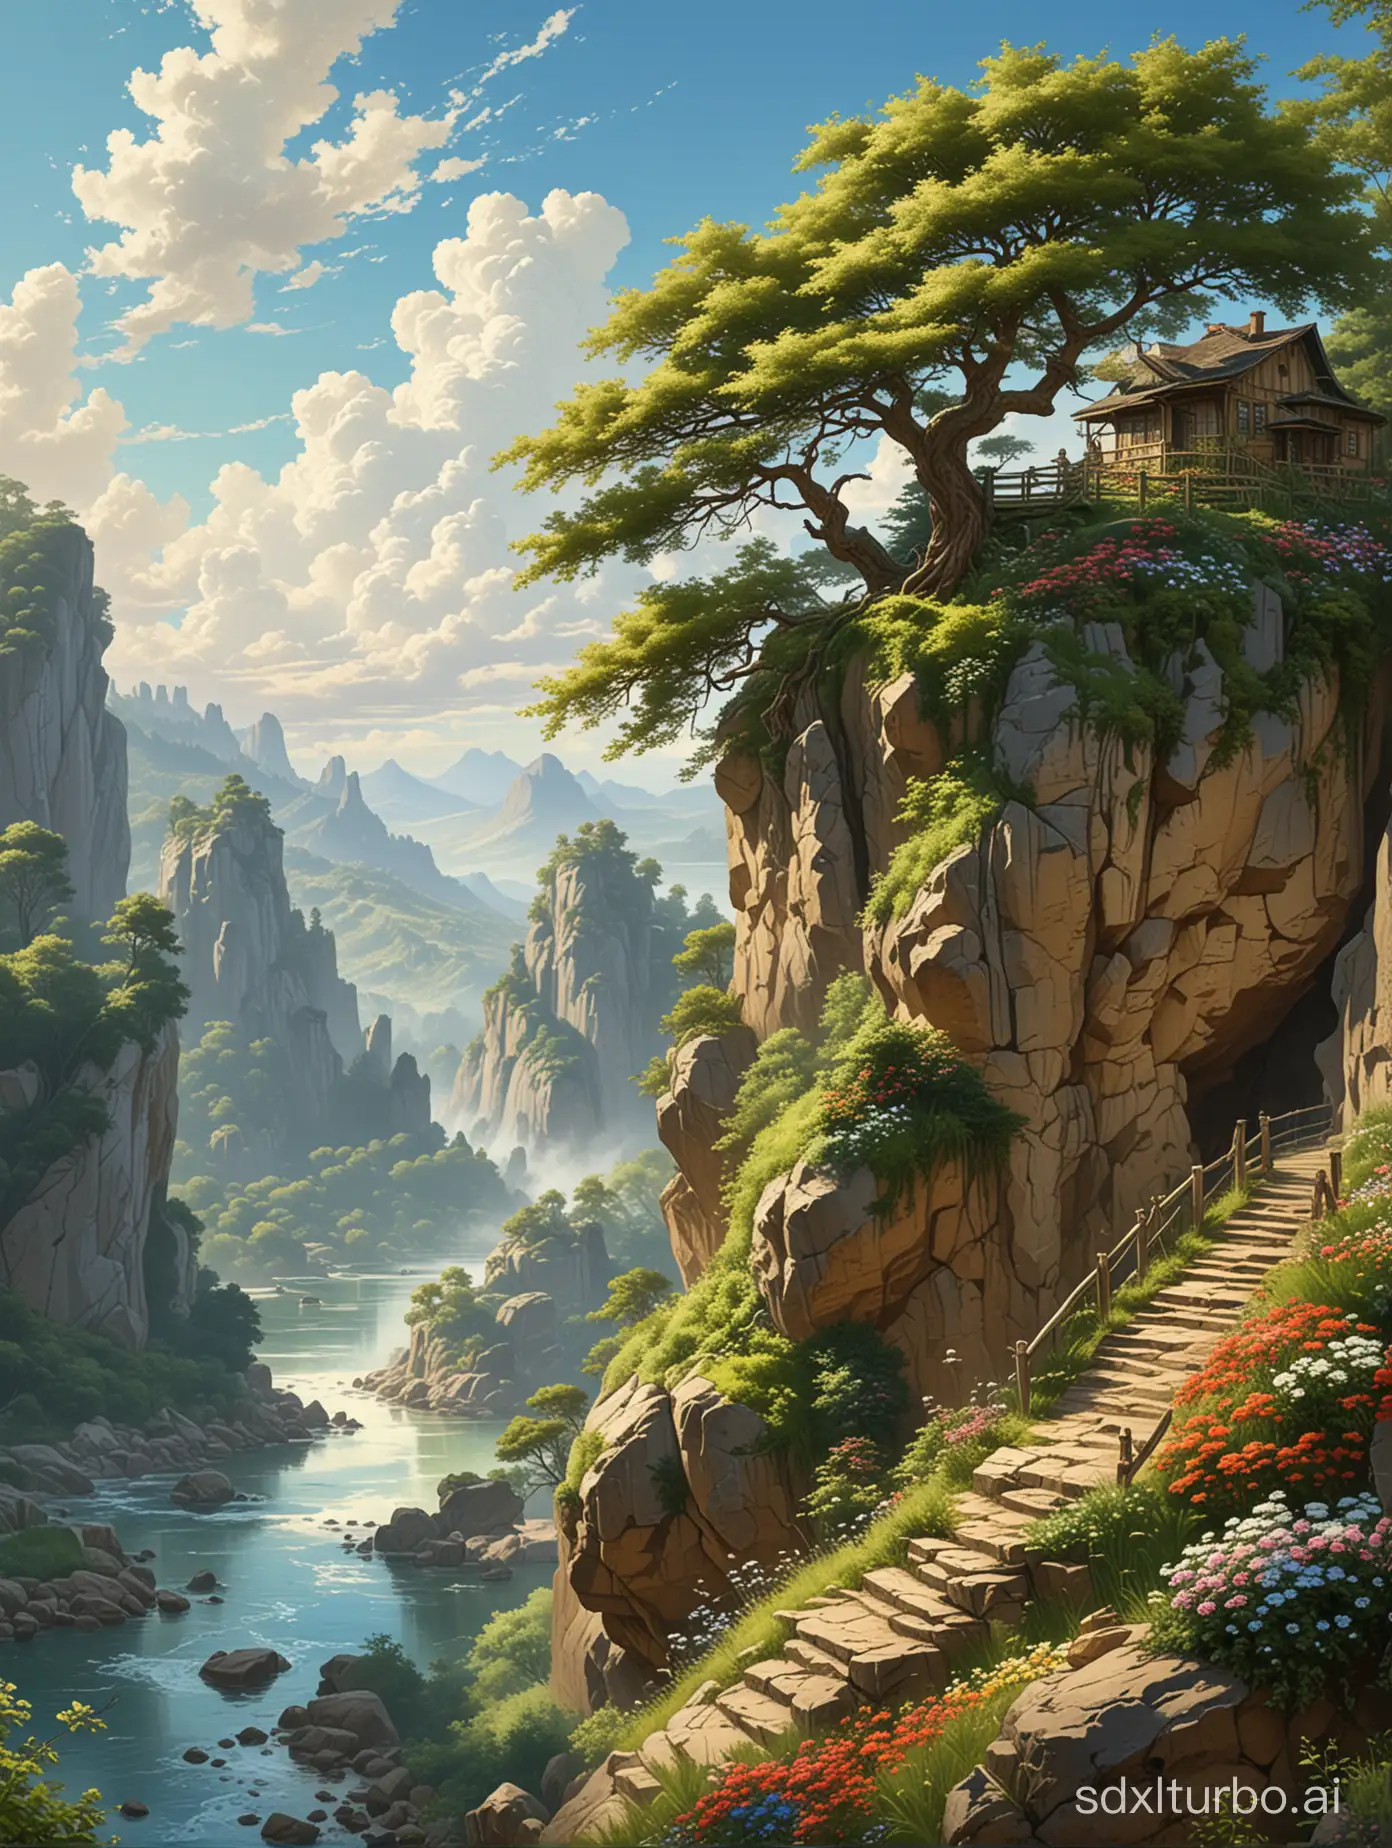 Majestic-Cliffside-View-with-Volkswagen-and-Bonsai-An-Ultrarealistic-Landscape-in-Carl-Spitzwegs-Style